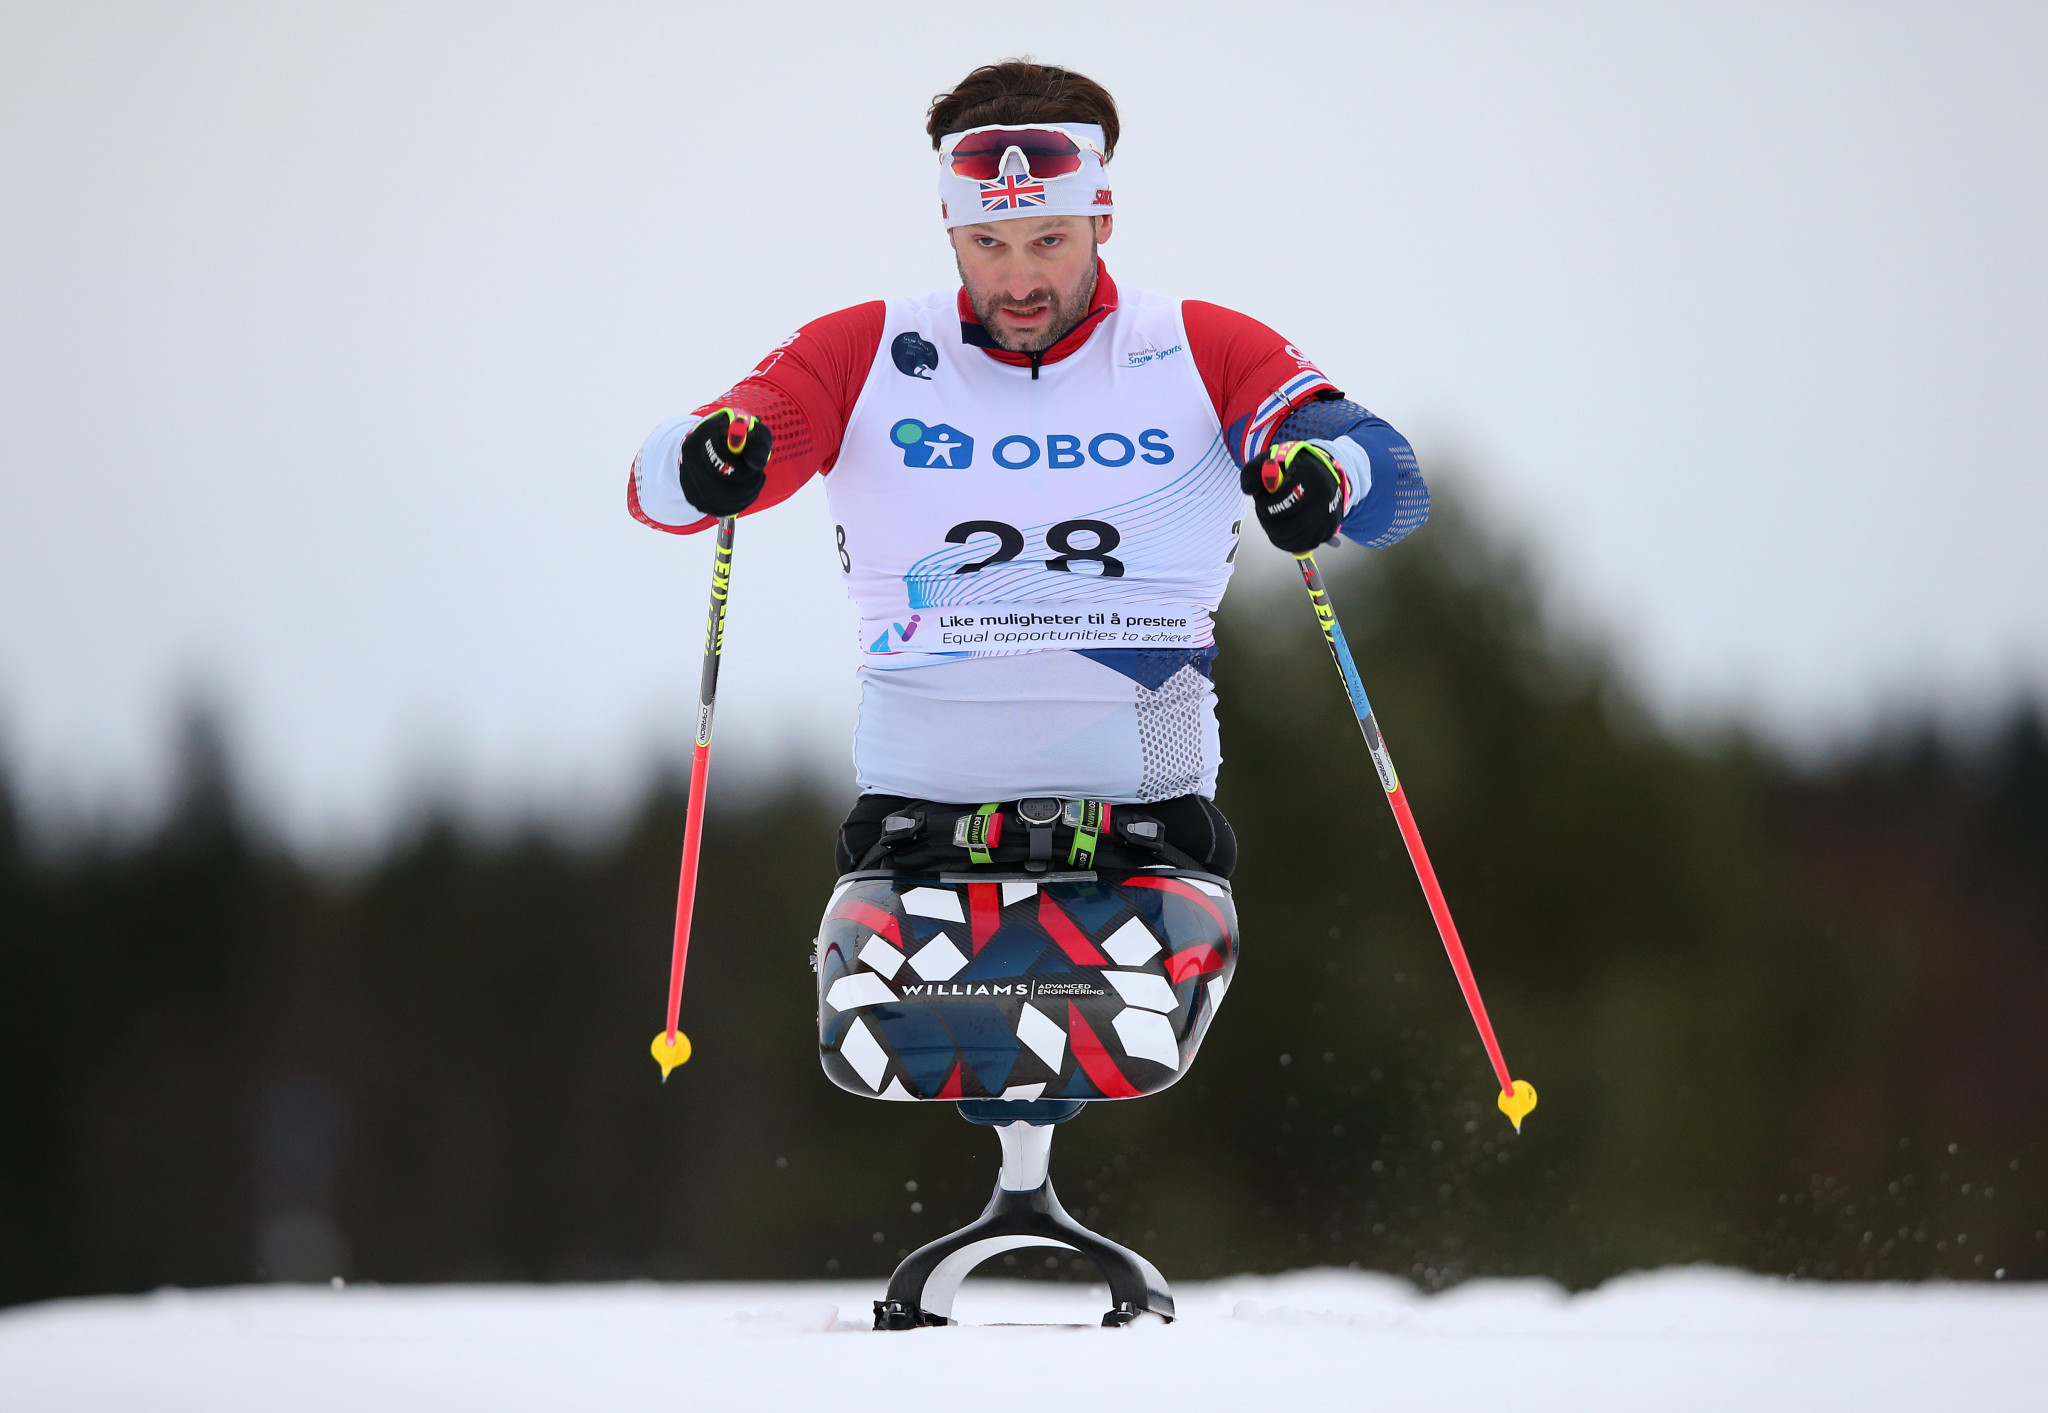 Steve Arnold has tested positive for COVID-19 upon arrival in Beijing ©Getty Images